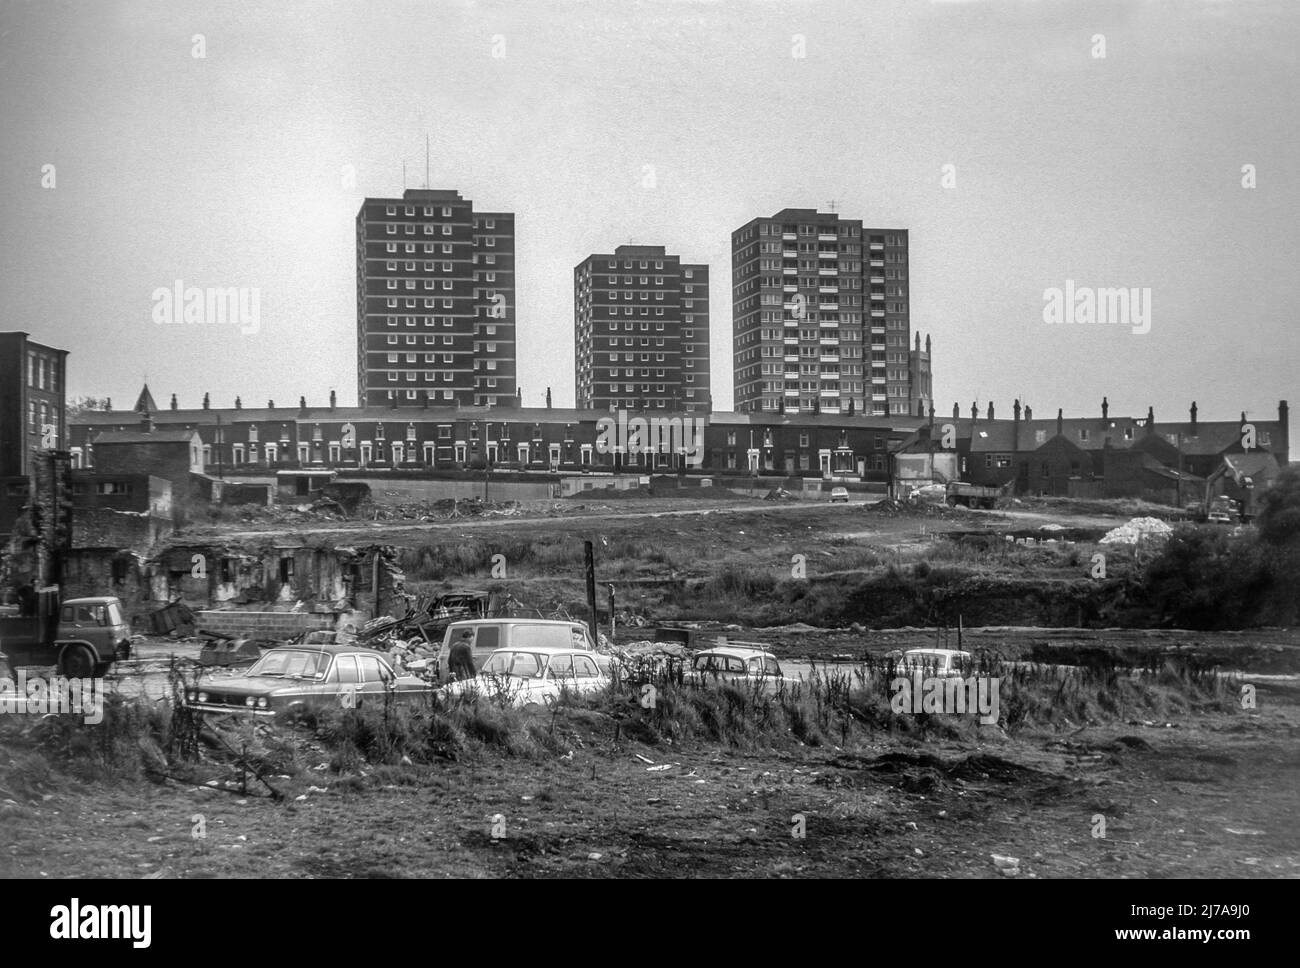 1975 black and white archive image of the Primrose Bank Redevelopment Area in Blackburn, Lancashire. Tower blocks behind terraced housing were built in late 1960s and have since been part demolished and part refurbished. Stock Photo